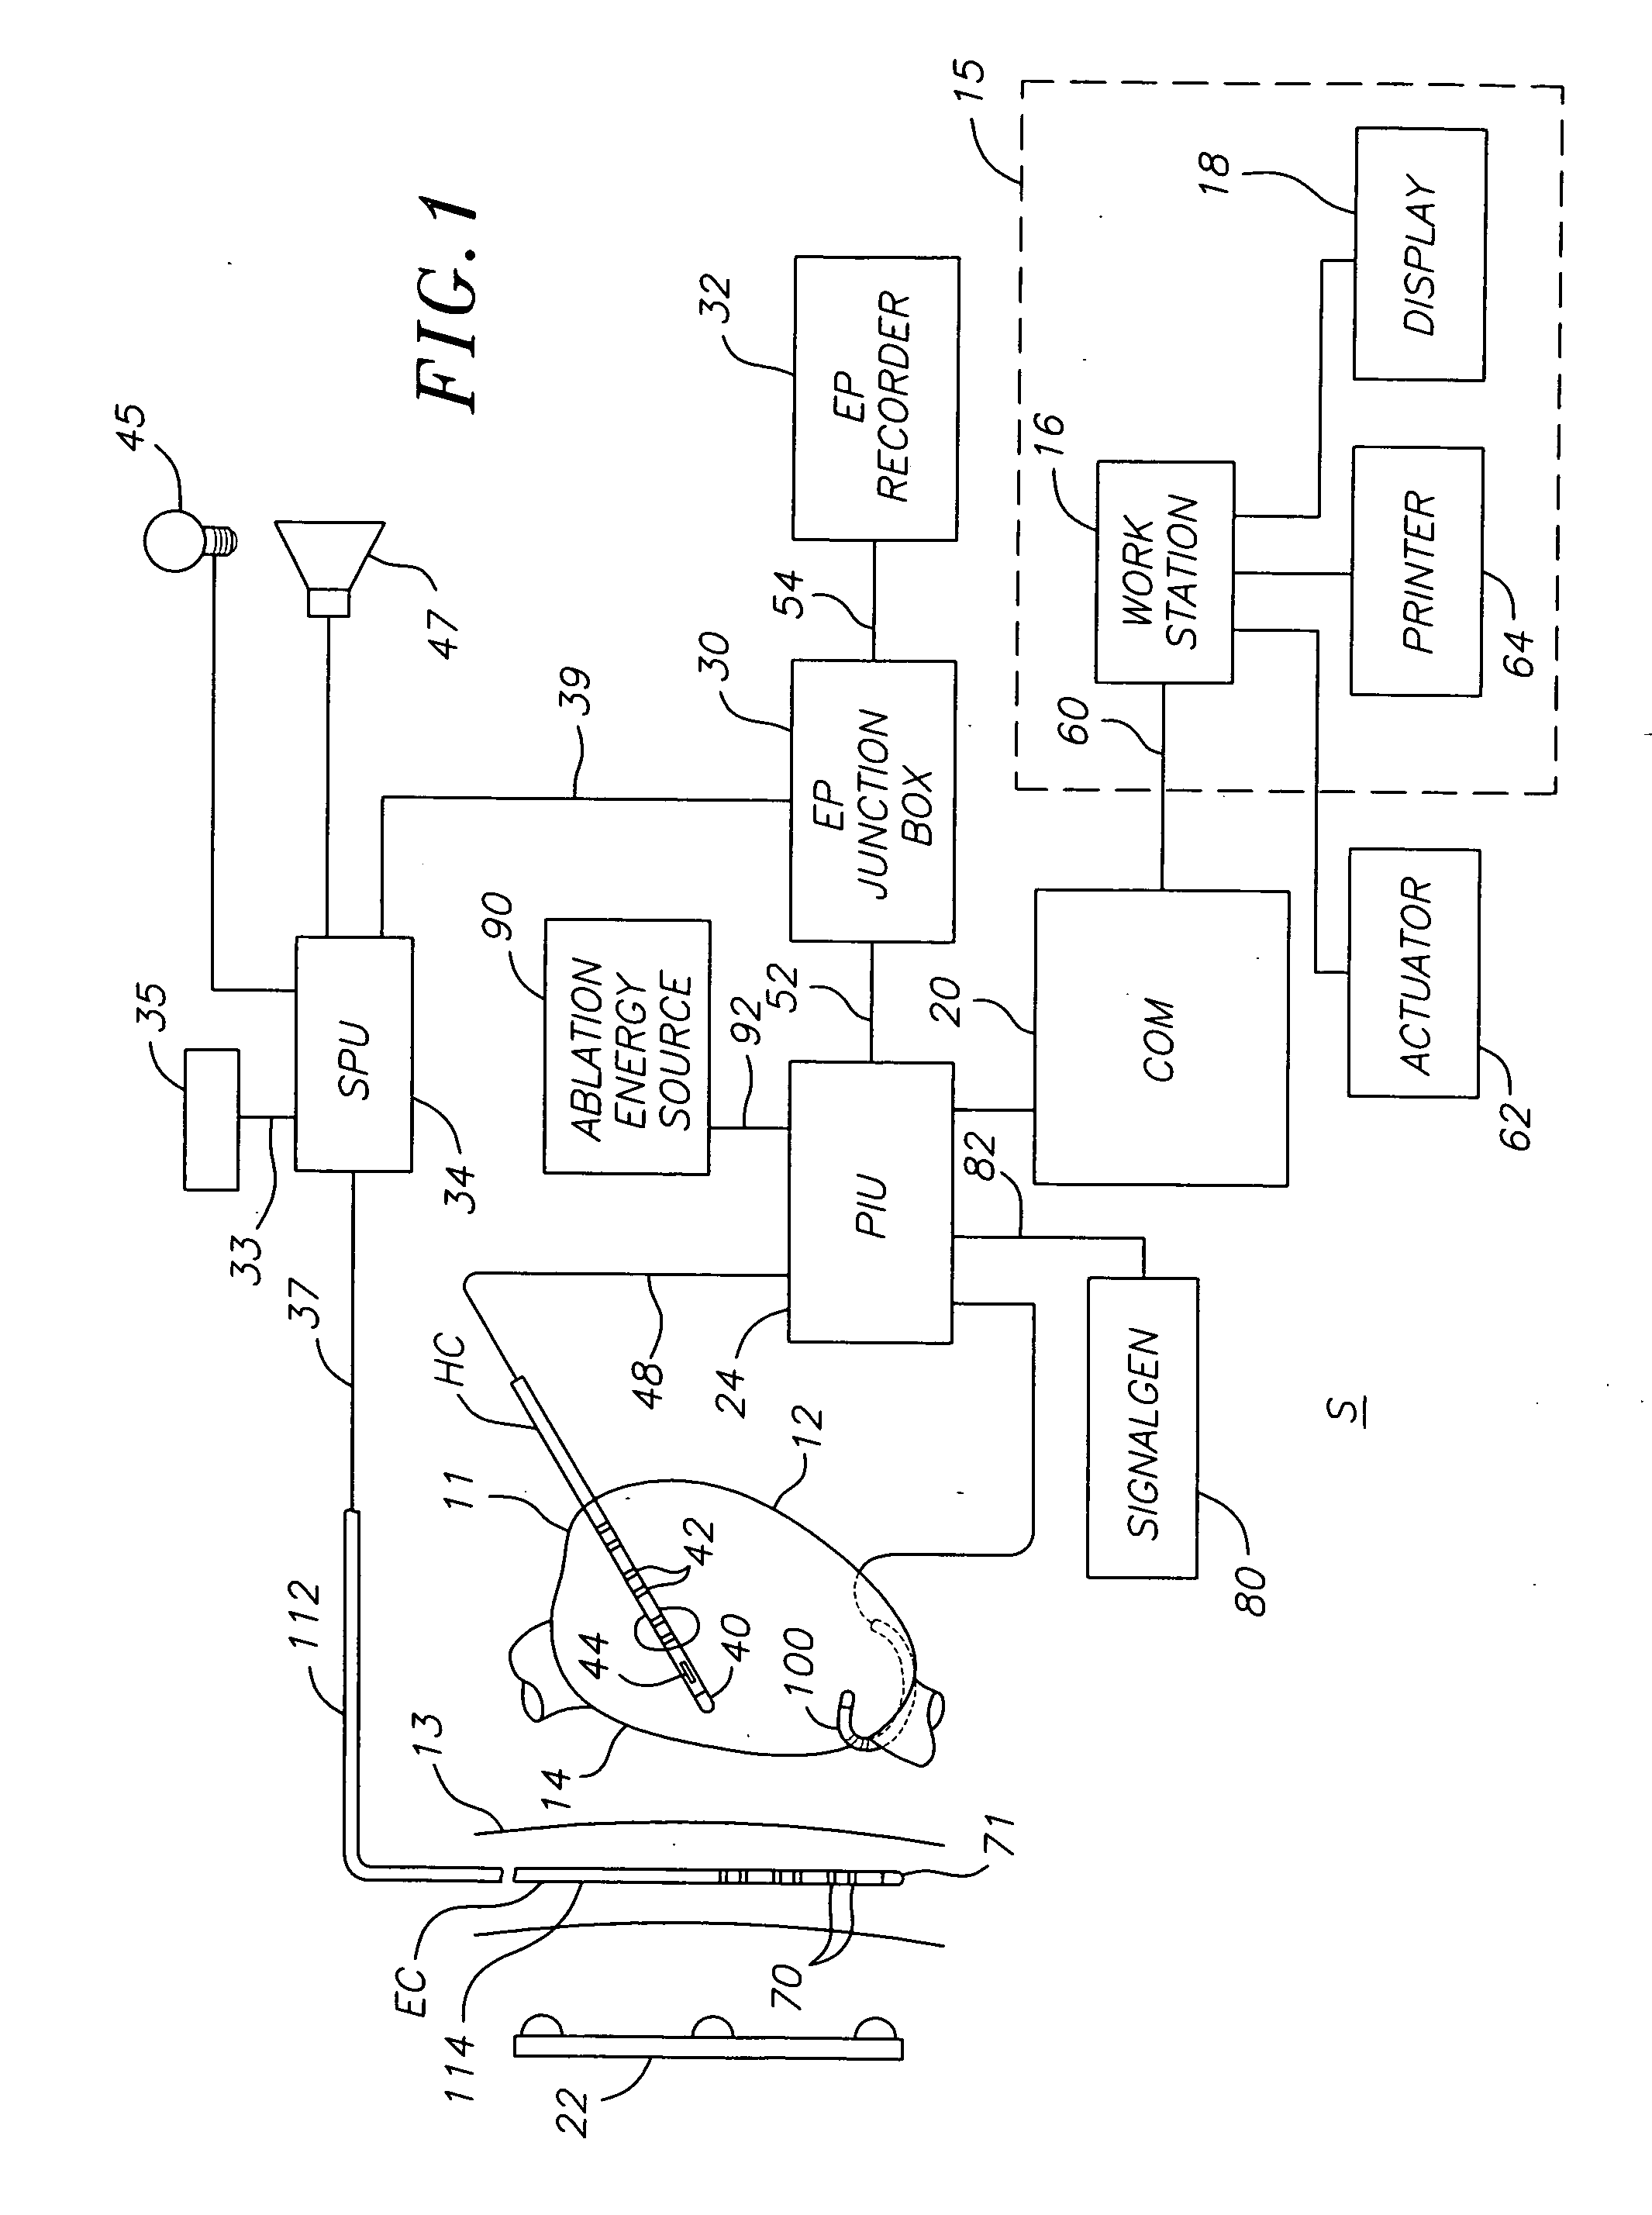 System and method for monitoring esophagus proximity